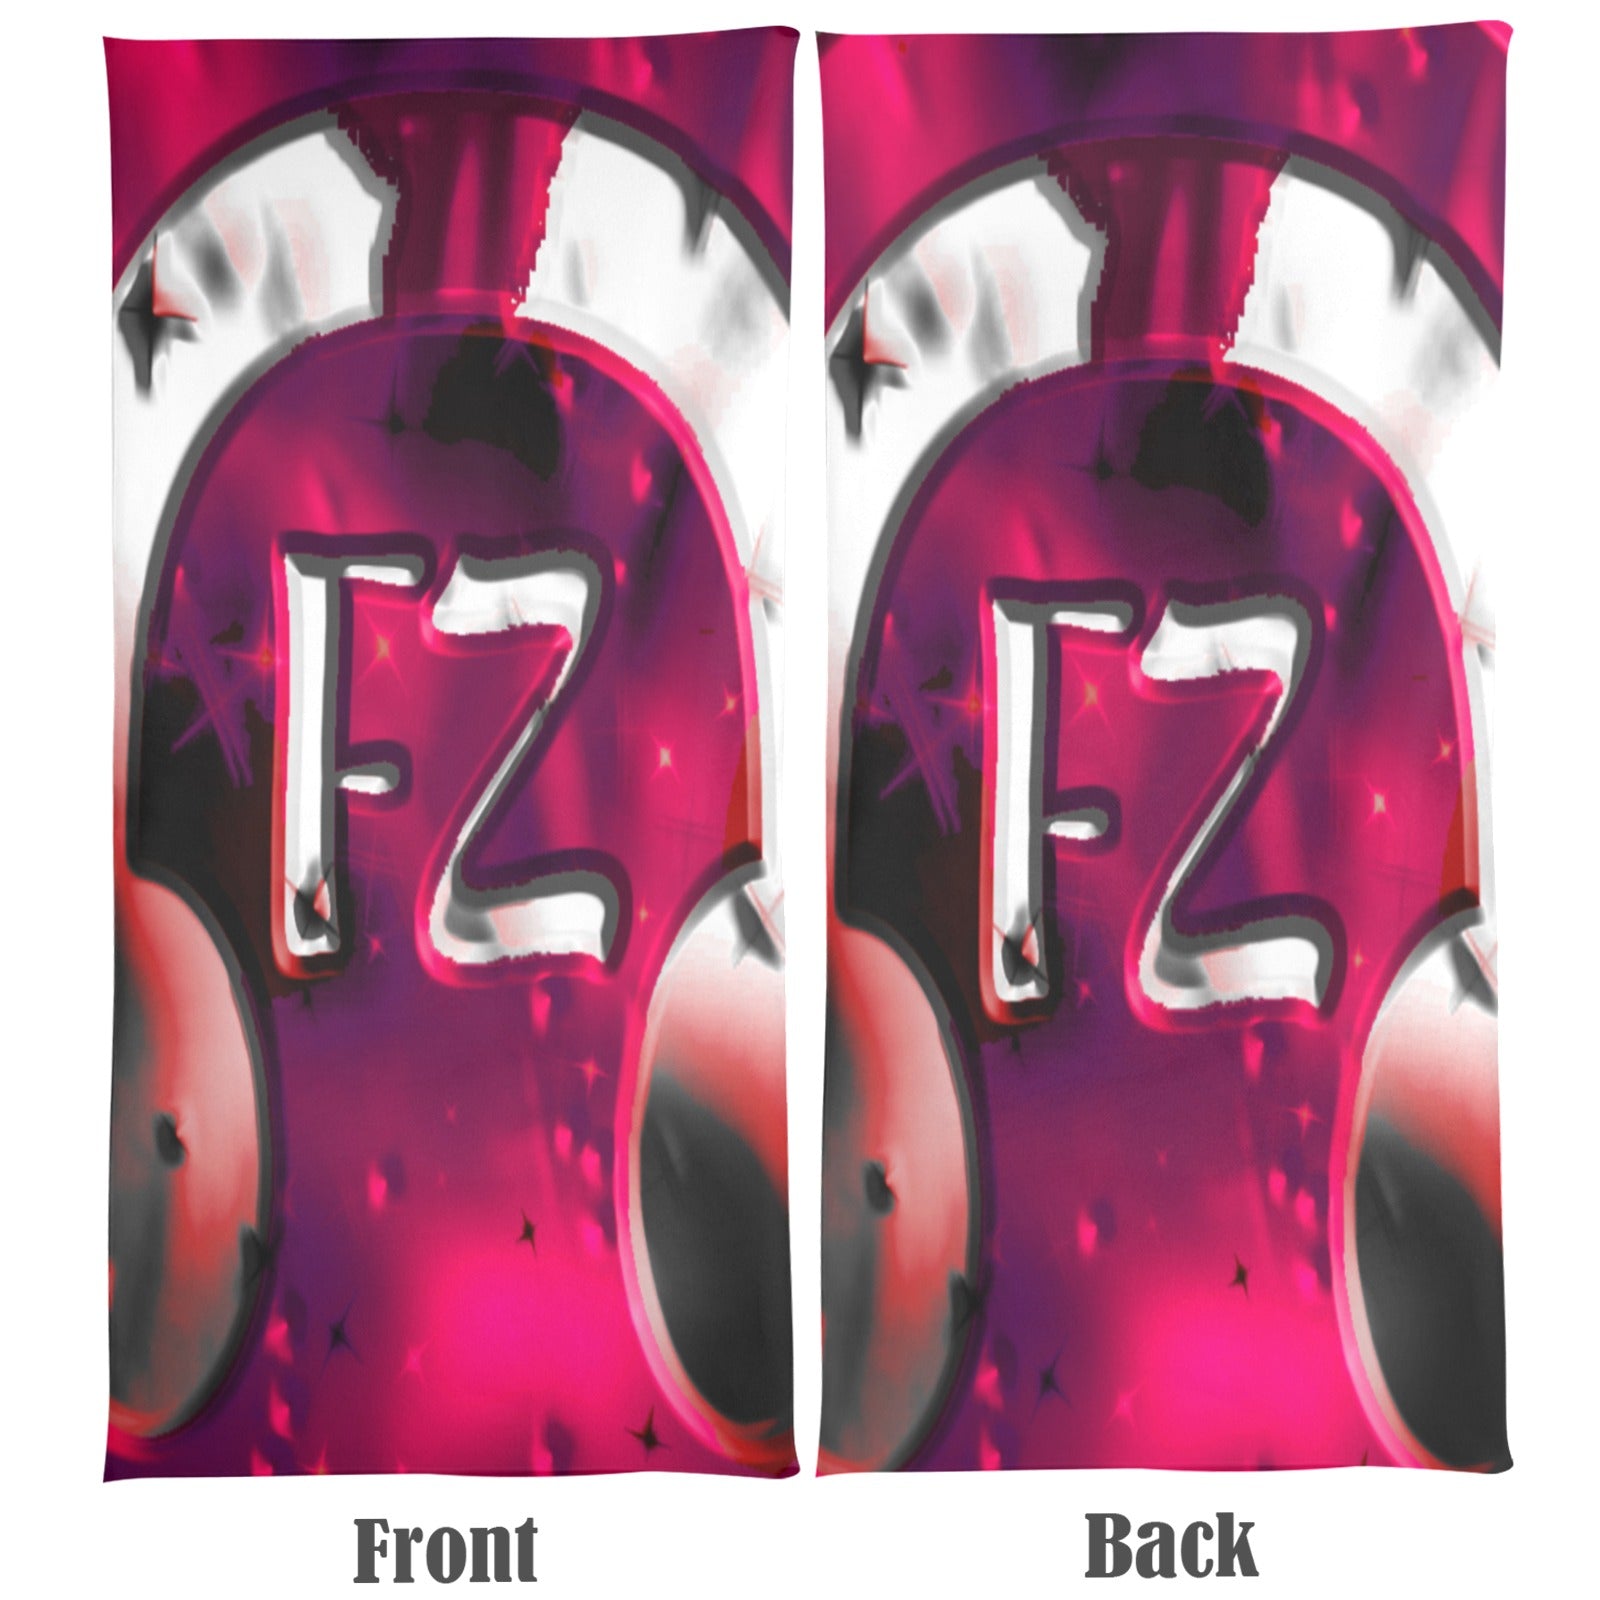 fz beach towel abstract 4 beach towel 31"x71"(two sides with different printing)